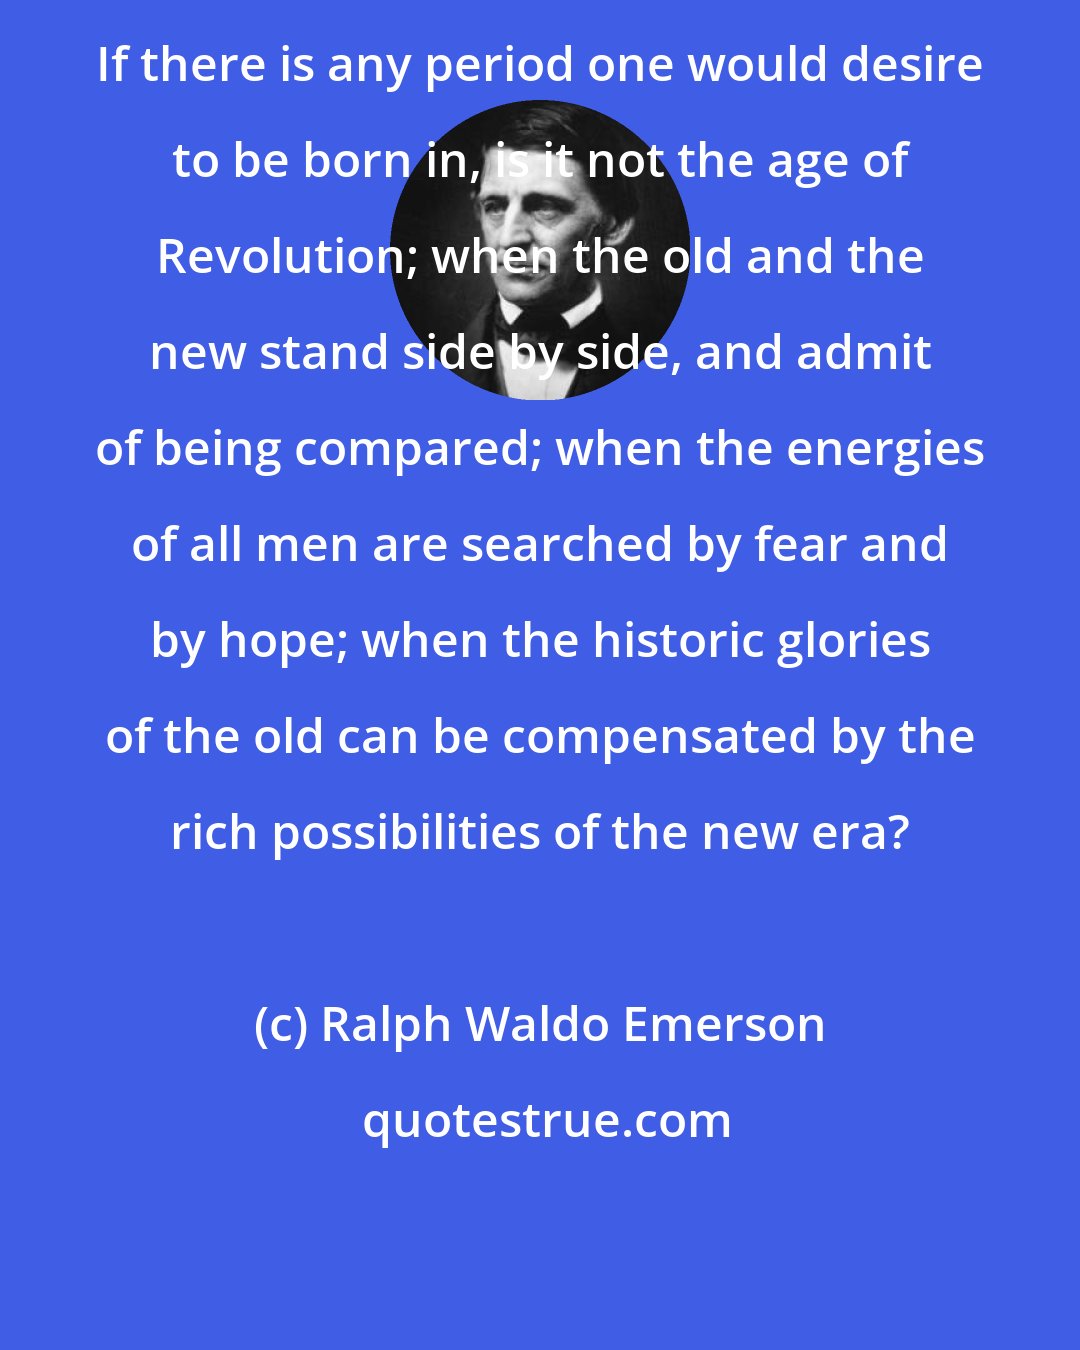 Ralph Waldo Emerson: If there is any period one would desire to be born in, is it not the age of Revolution; when the old and the new stand side by side, and admit of being compared; when the energies of all men are searched by fear and by hope; when the historic glories of the old can be compensated by the rich possibilities of the new era?